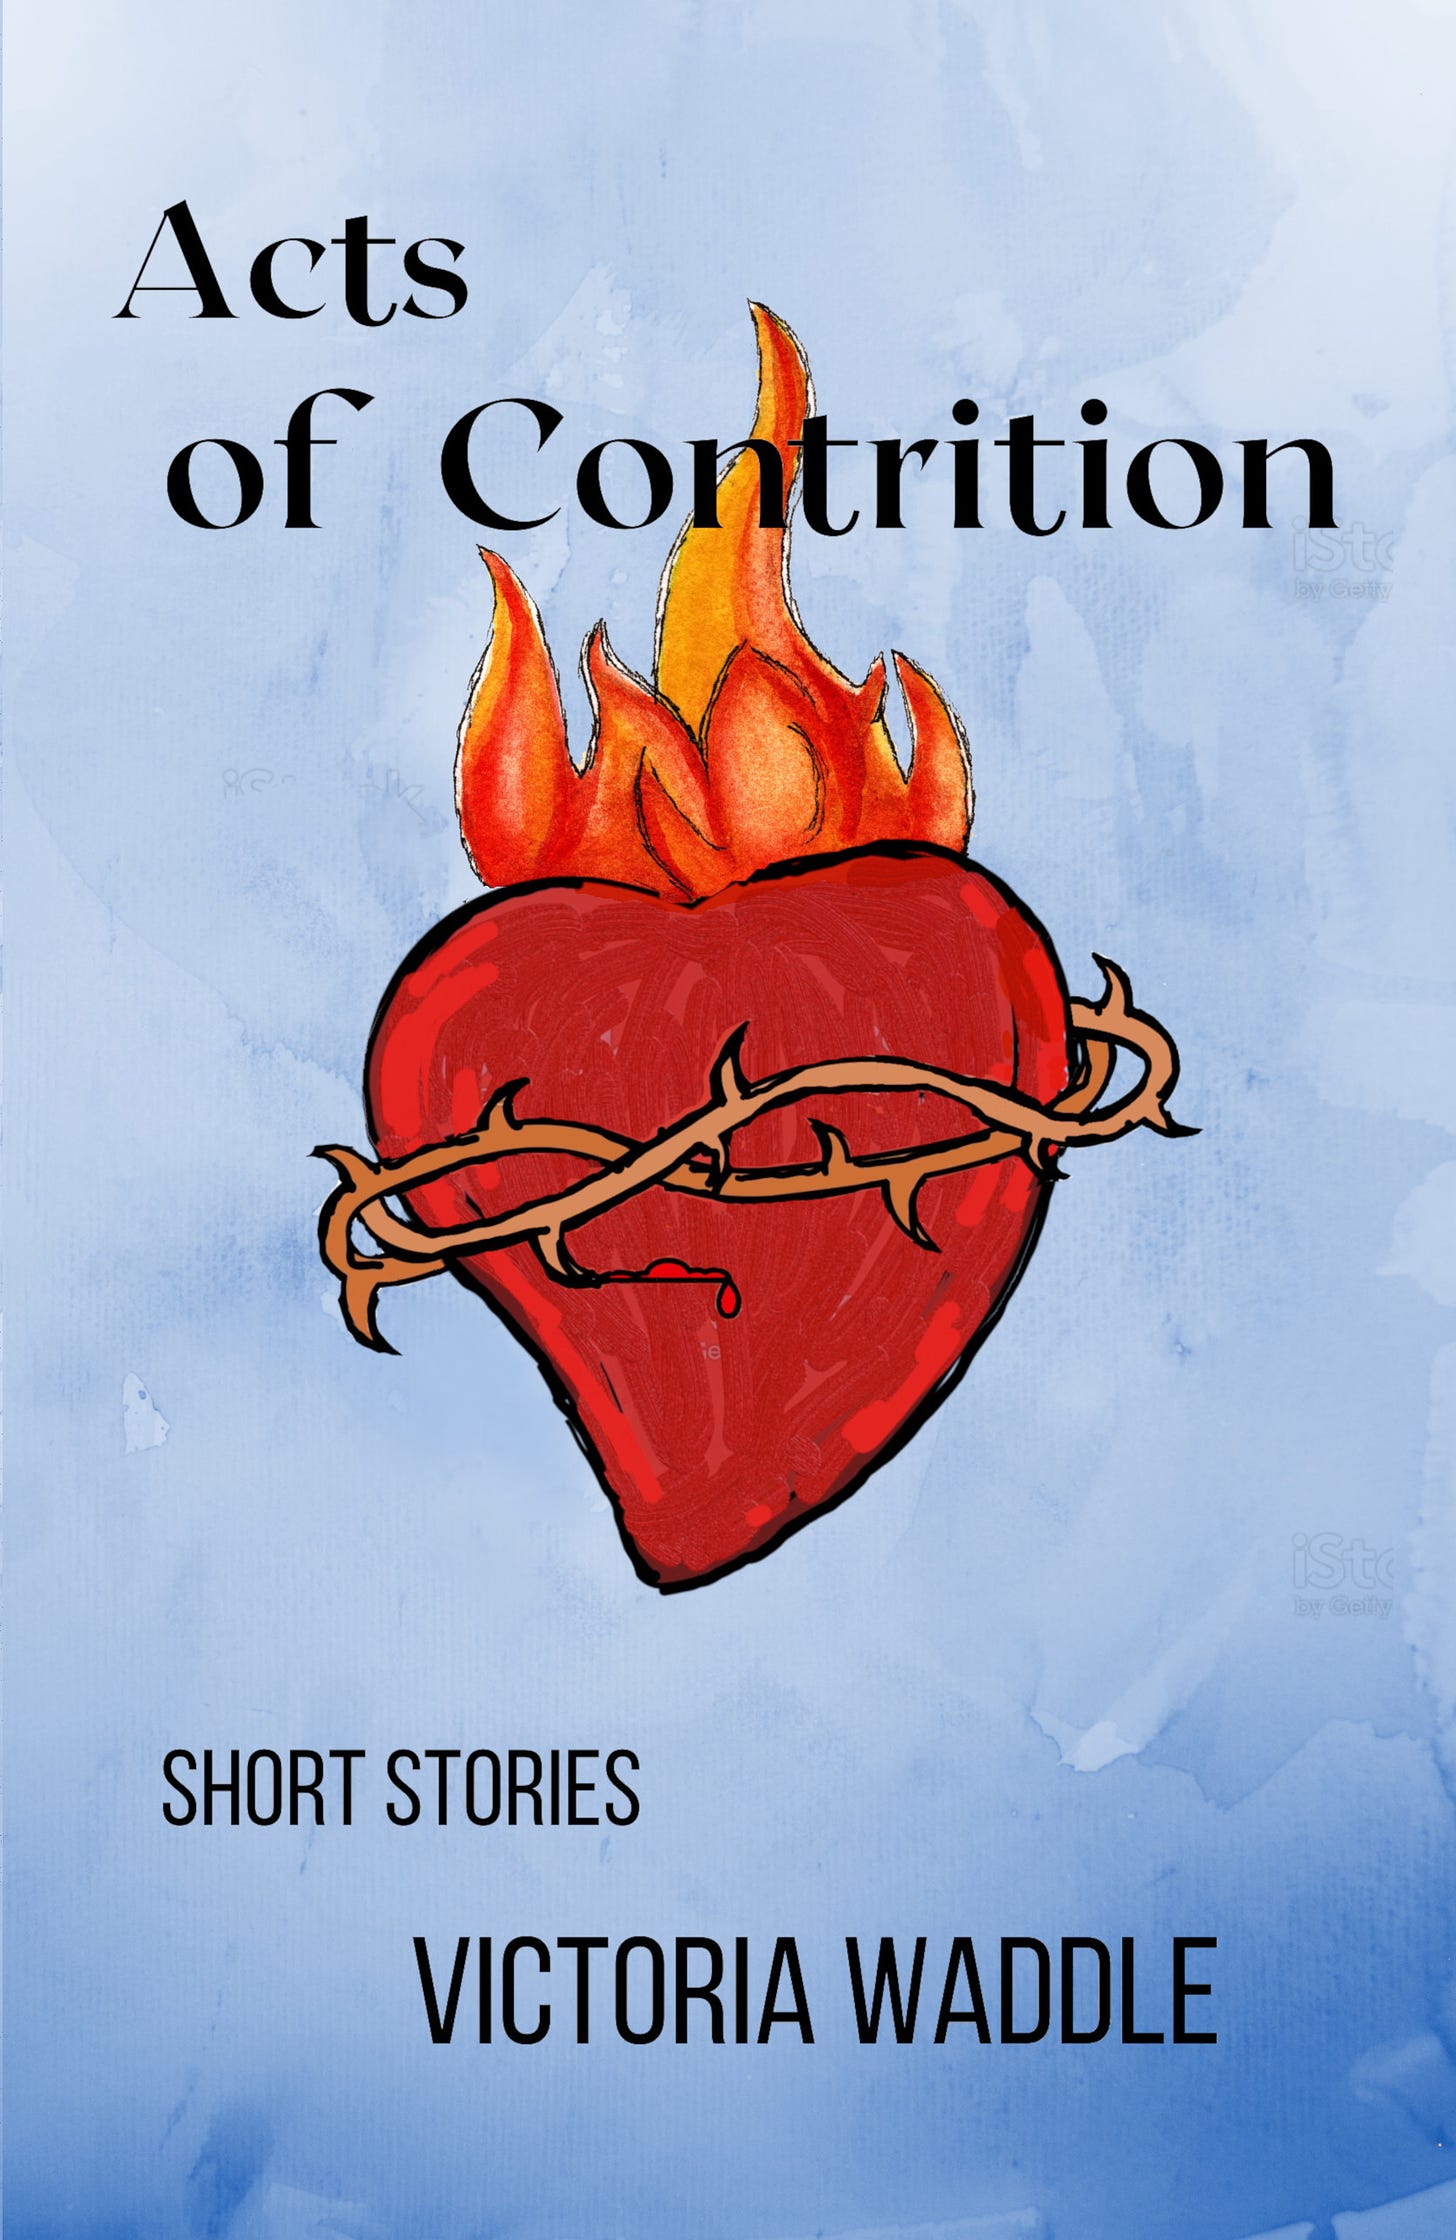 book cover with a sacred heart image and the words "Acts of Contrition."